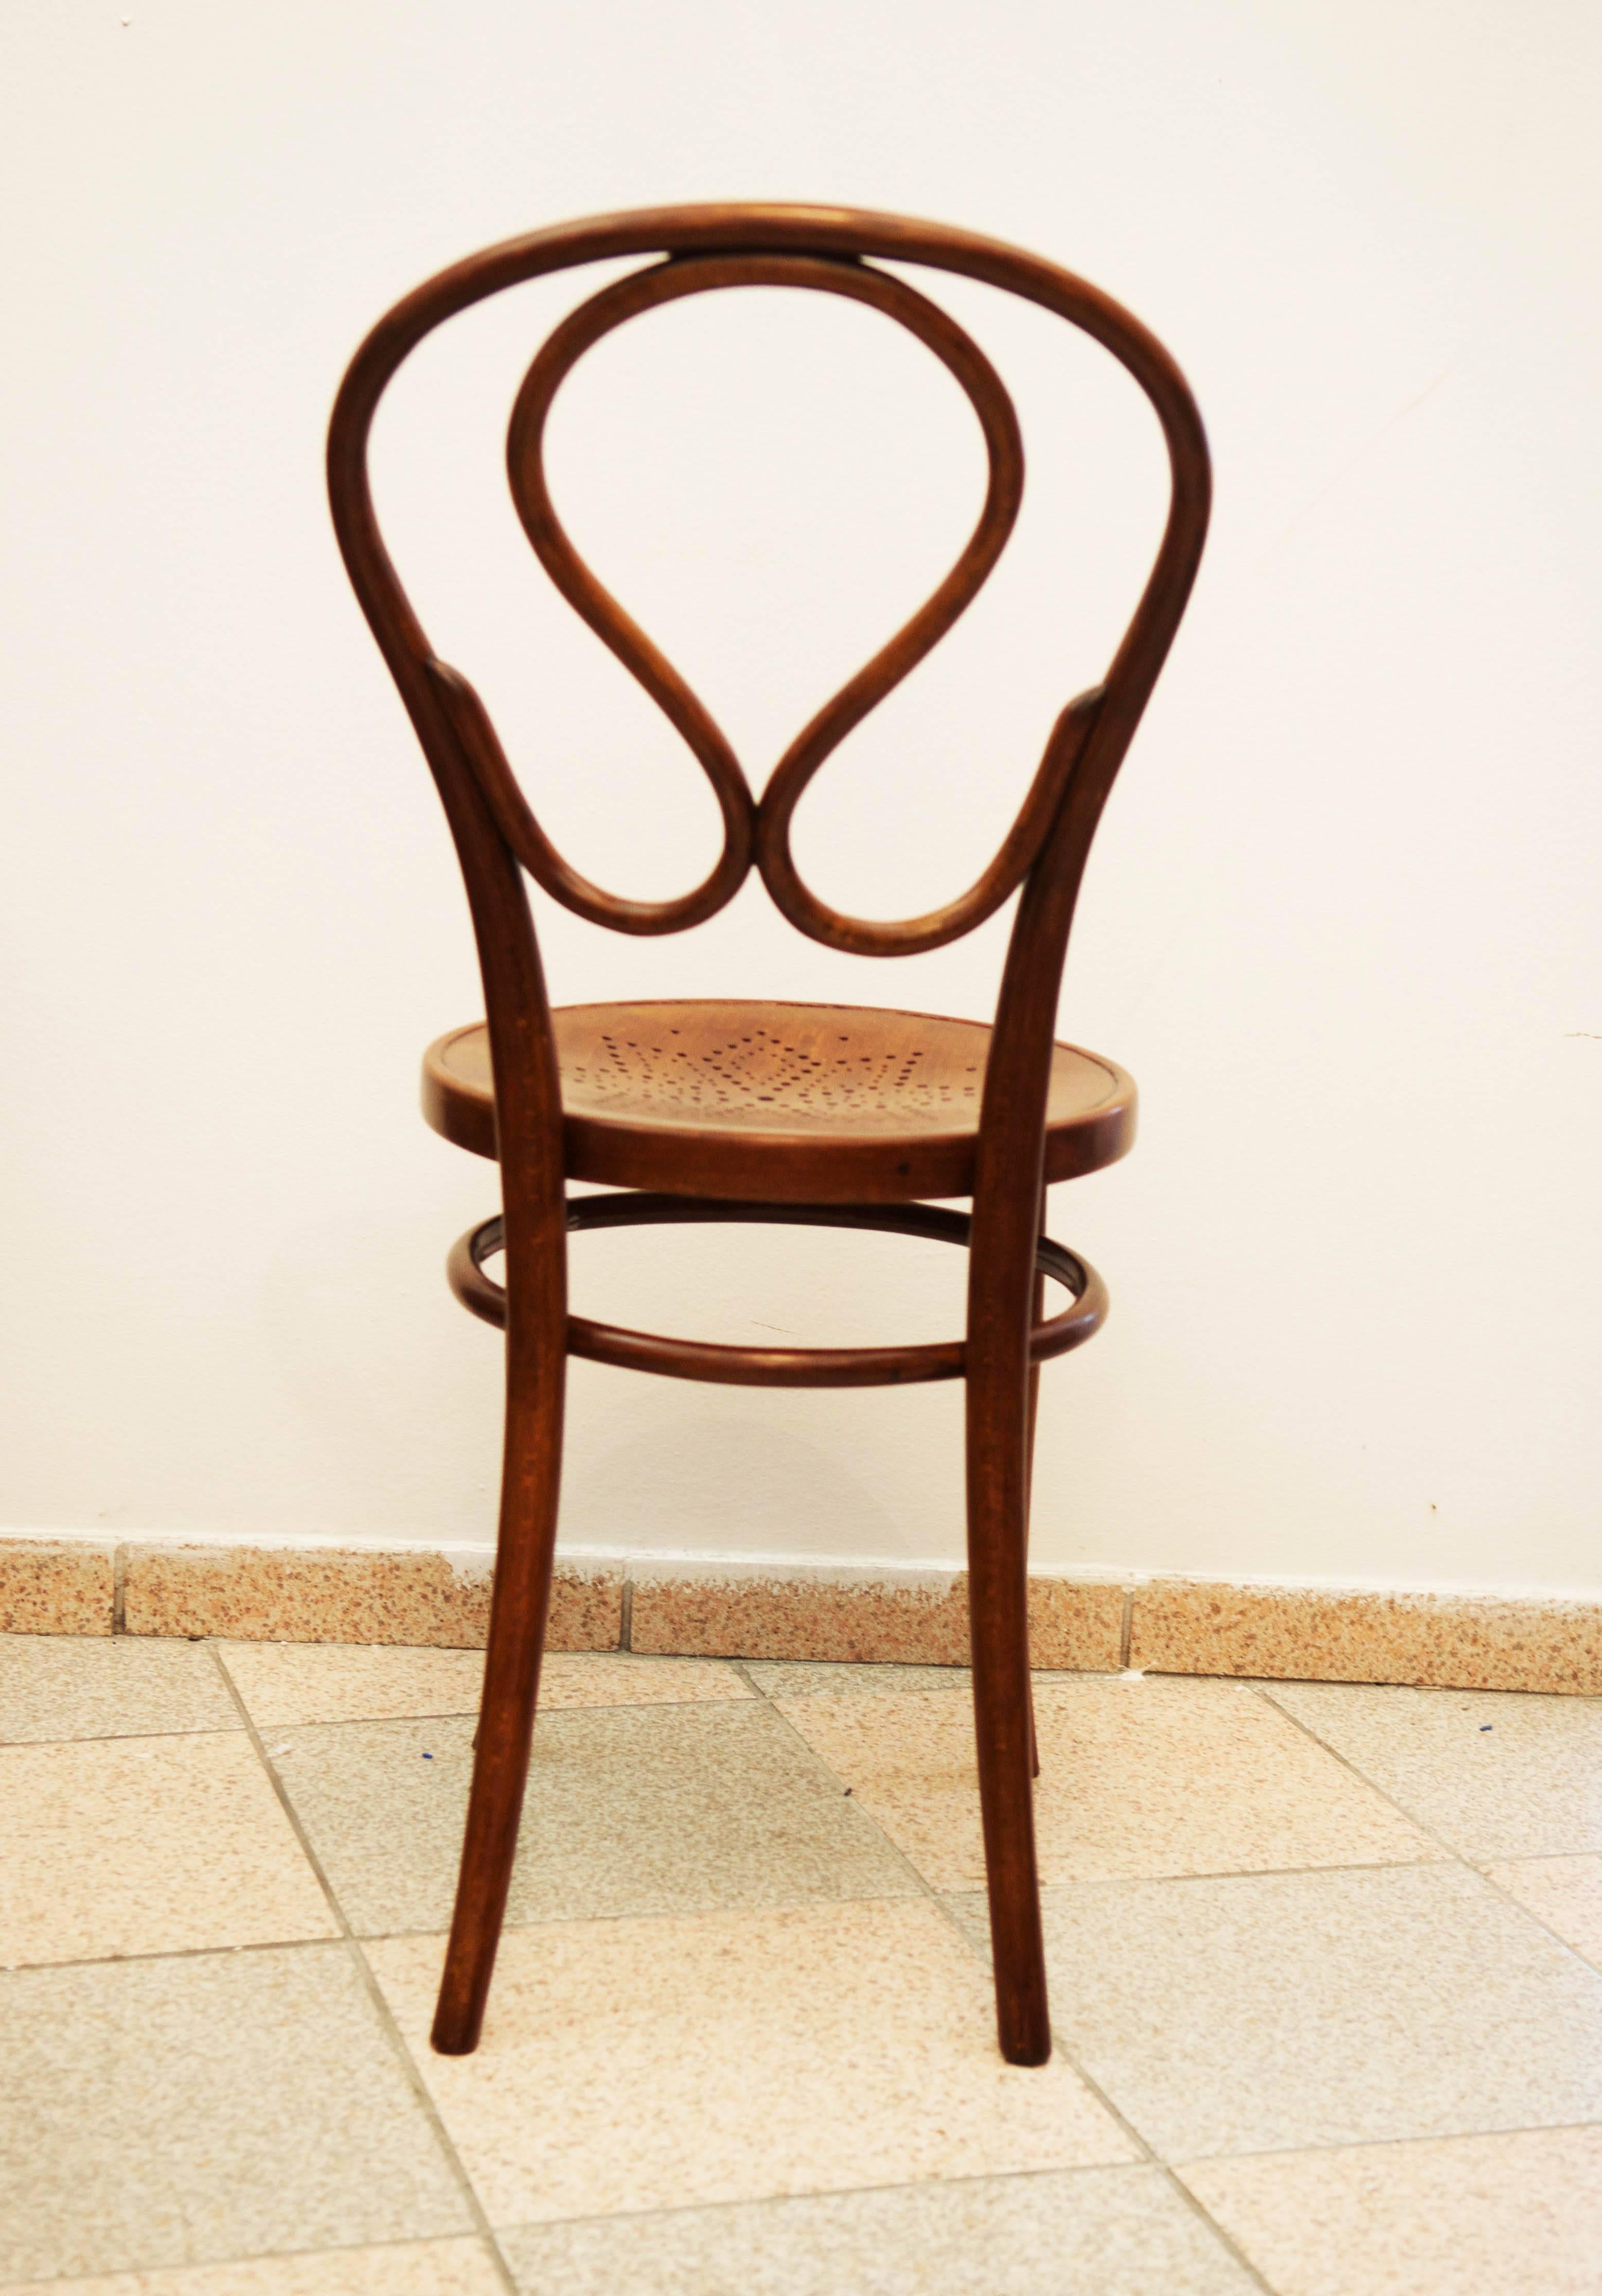 Beautiful bentwood construction with perforated plywood seat from the 1900.
Excellent restored.
Two pieces available.